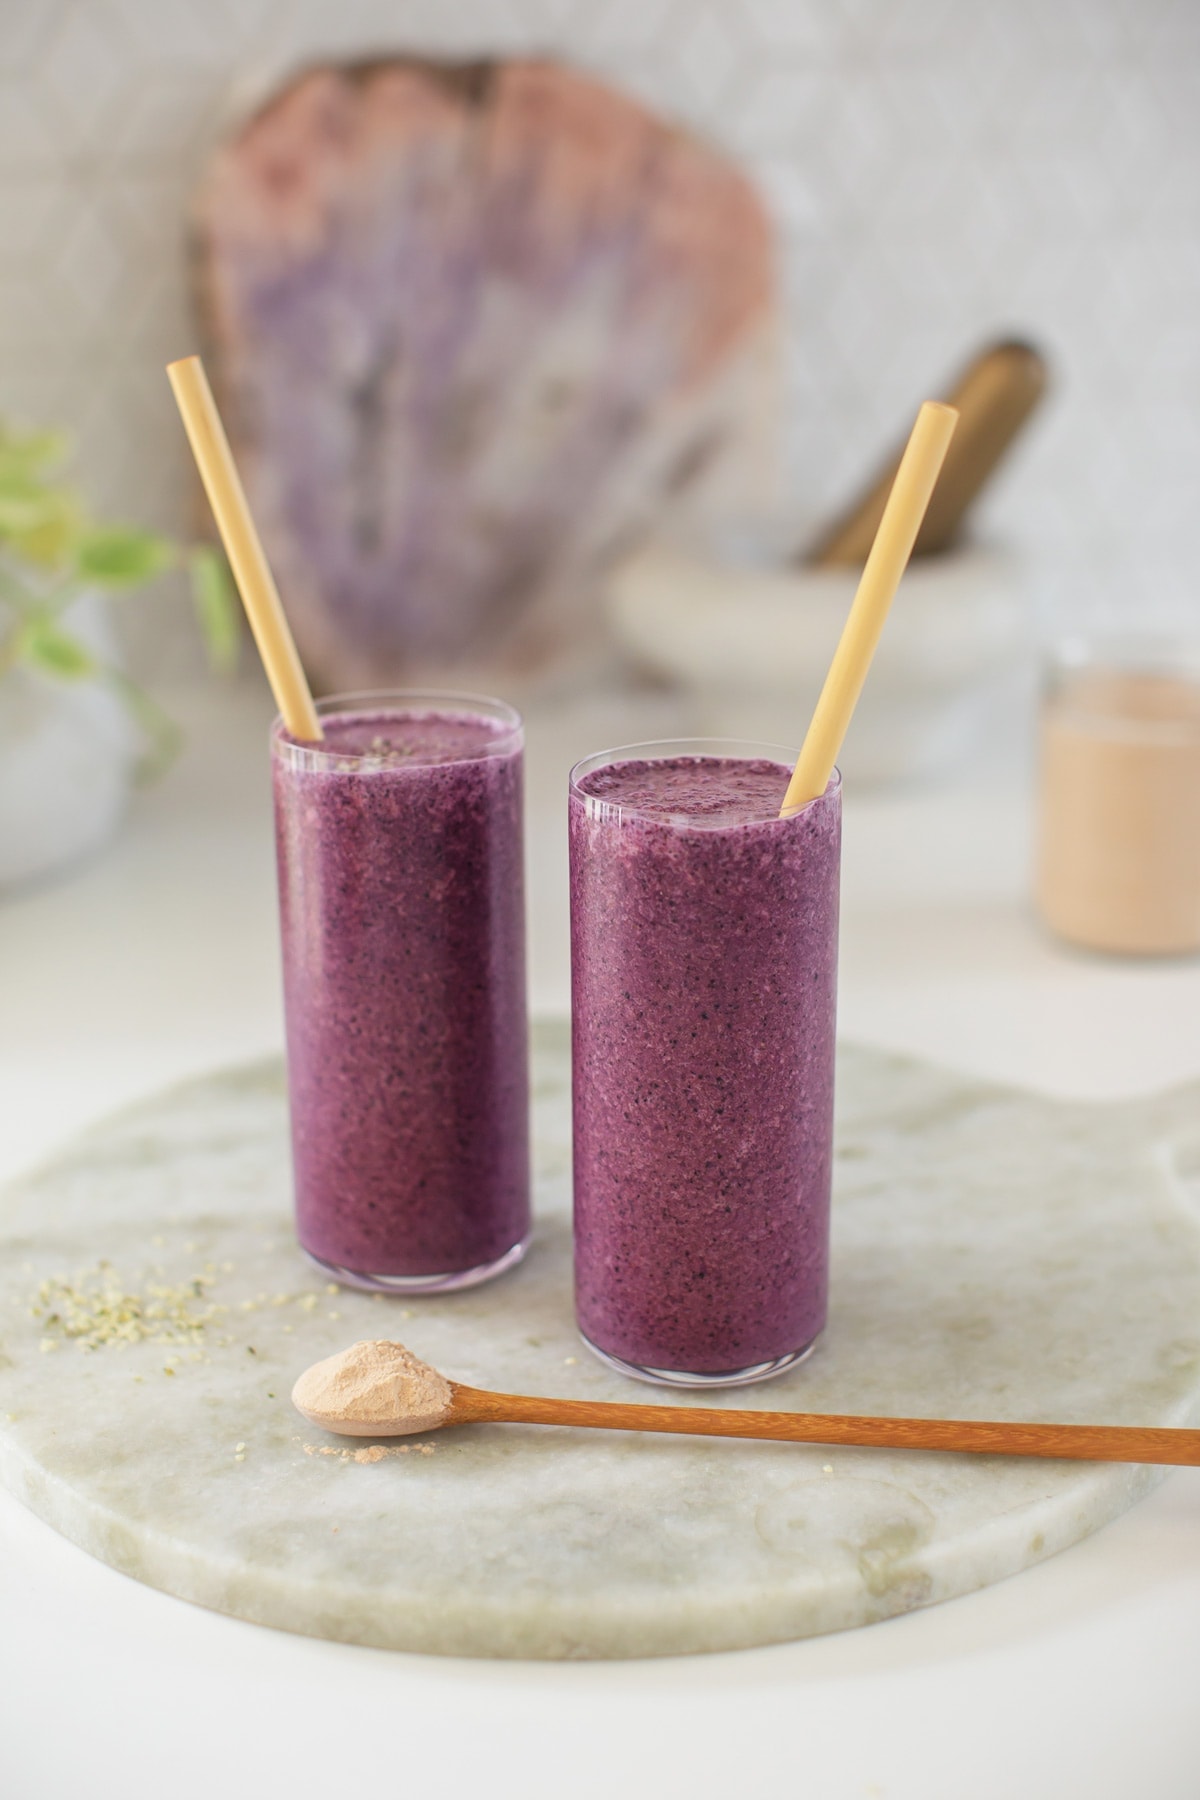 Two beautiful purple smoothies made with lucuma, each with wooden straws, on the kitchen bench top.